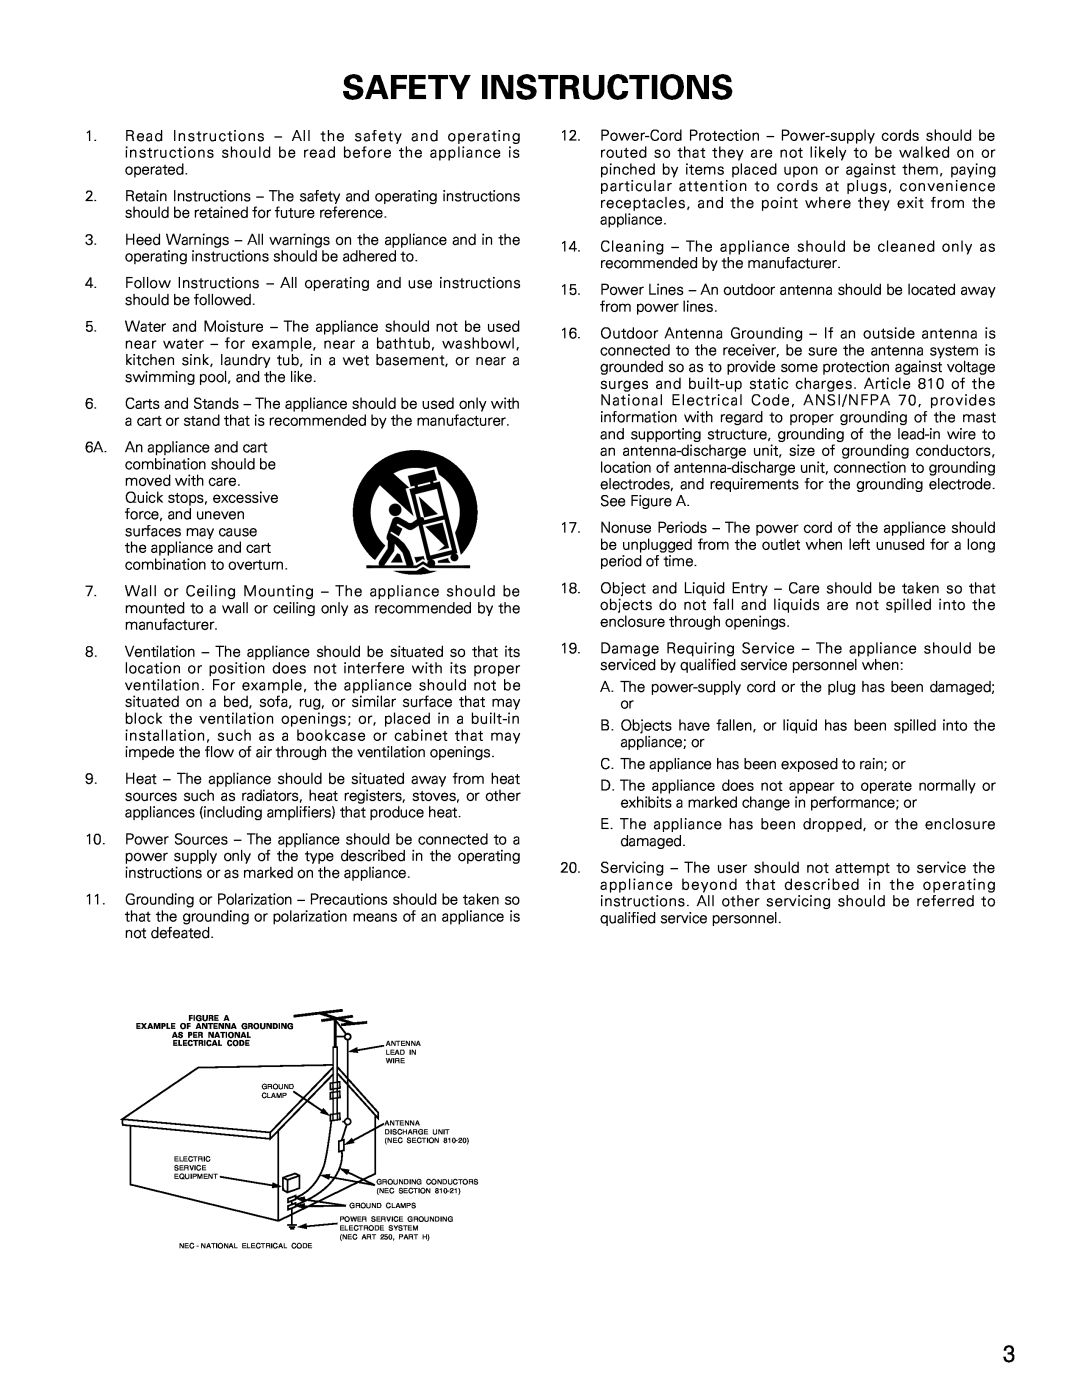 Denon 270, DCM-370 operating instructions Safety Instructions 